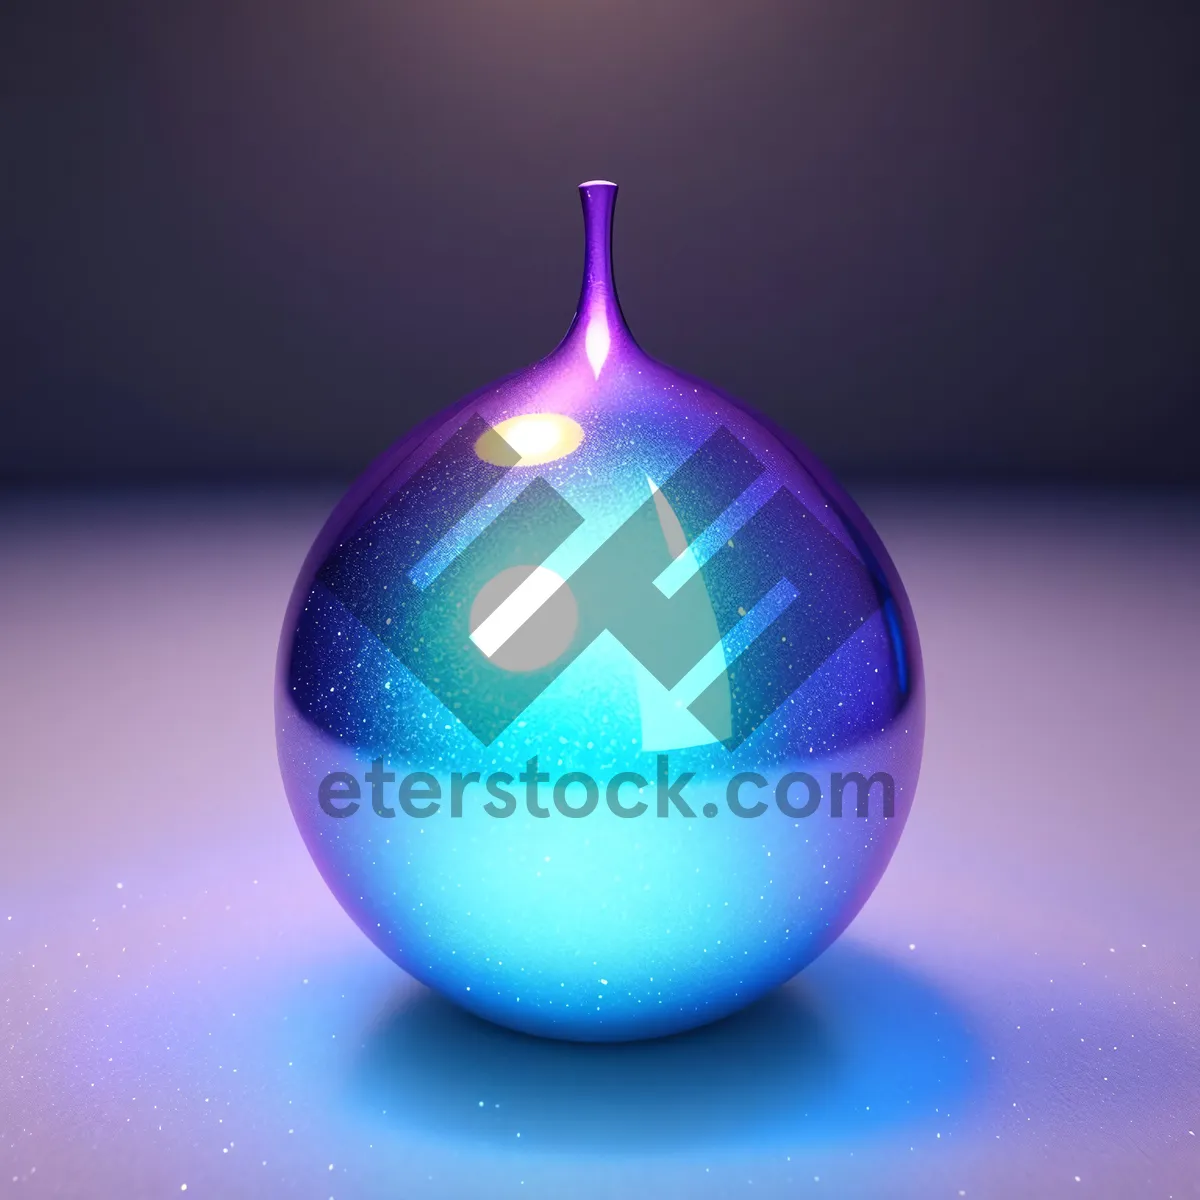 Picture of Festive Glass Ball Decoration for Holiday Celebration